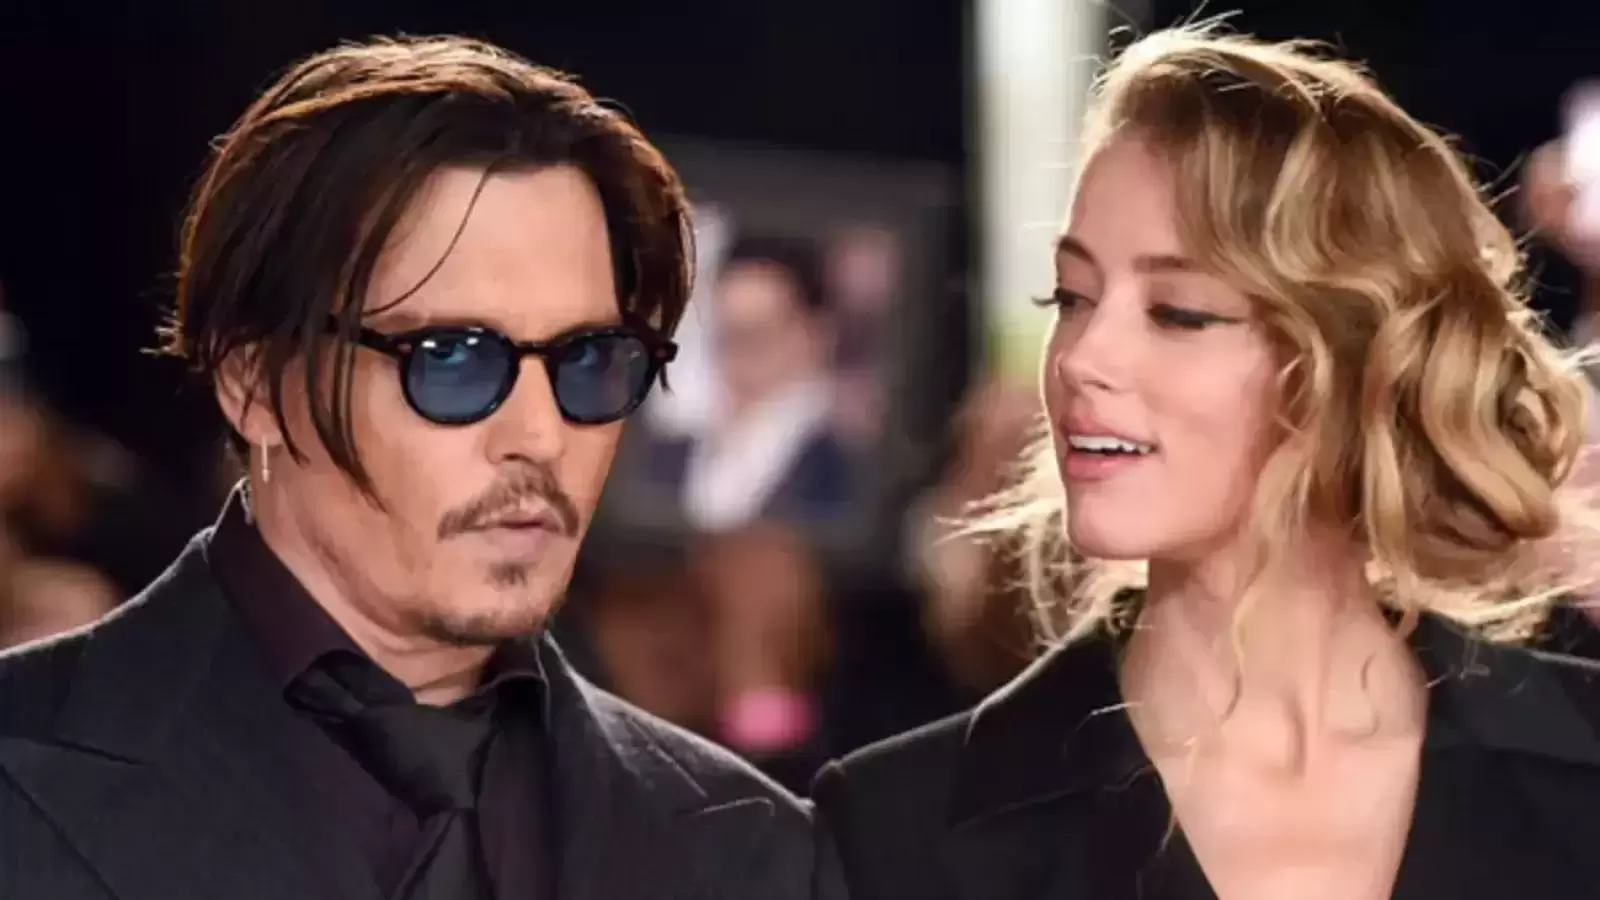 Amber Heard admits she ‘loves’ Johnny Depp with all her heart, says their marriage was ‘deeply broken’